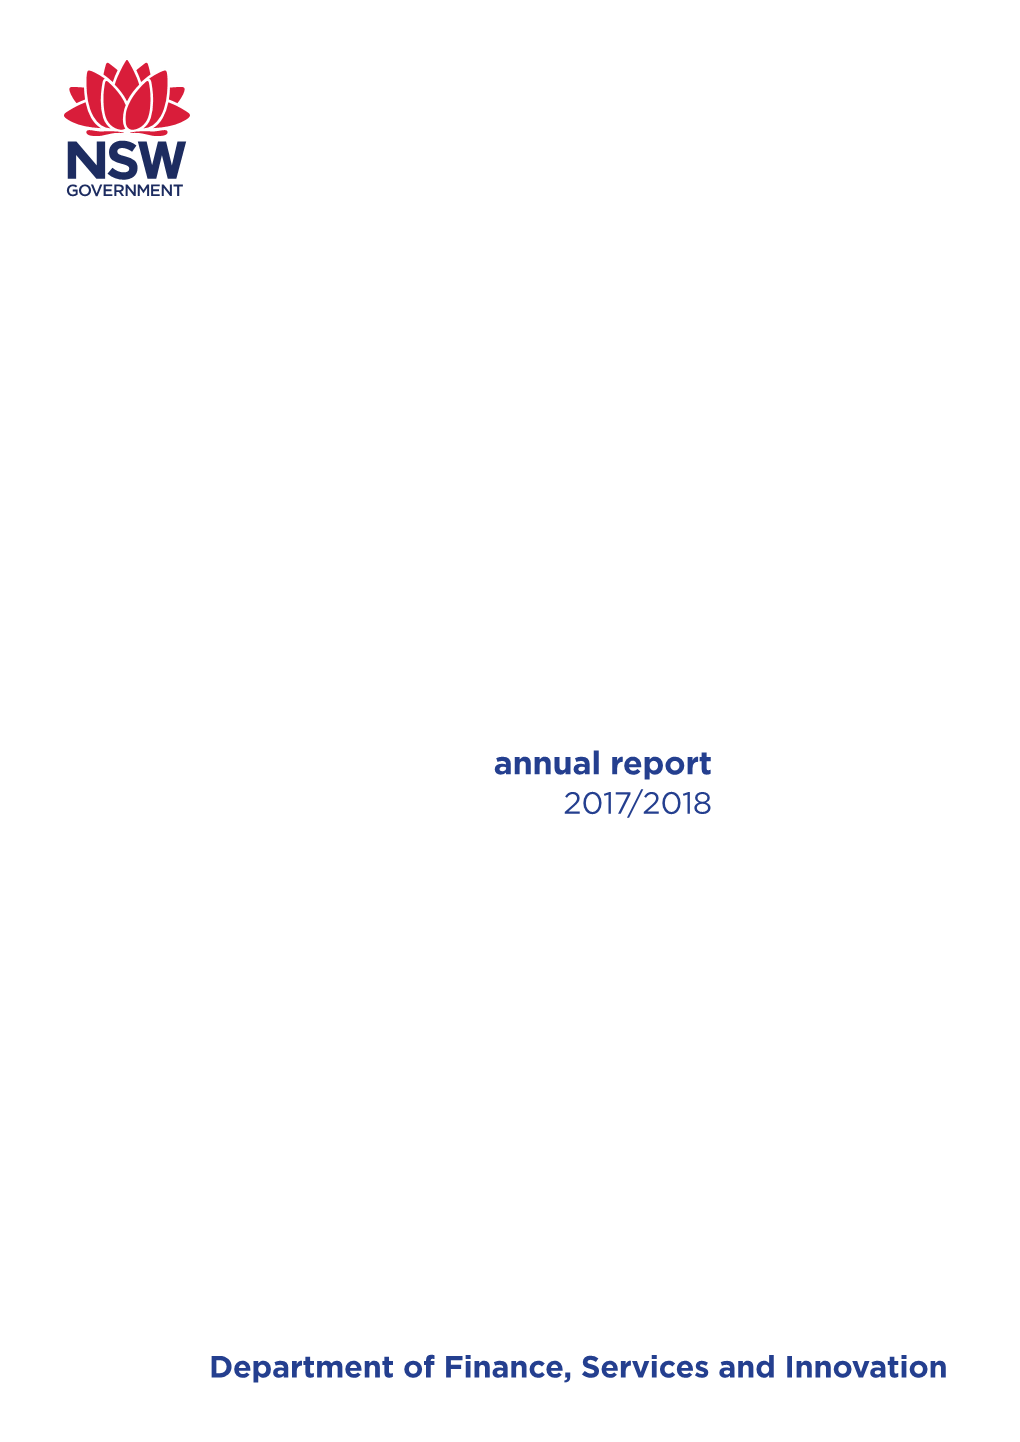 NSW DFSI Annual Report 2017-18